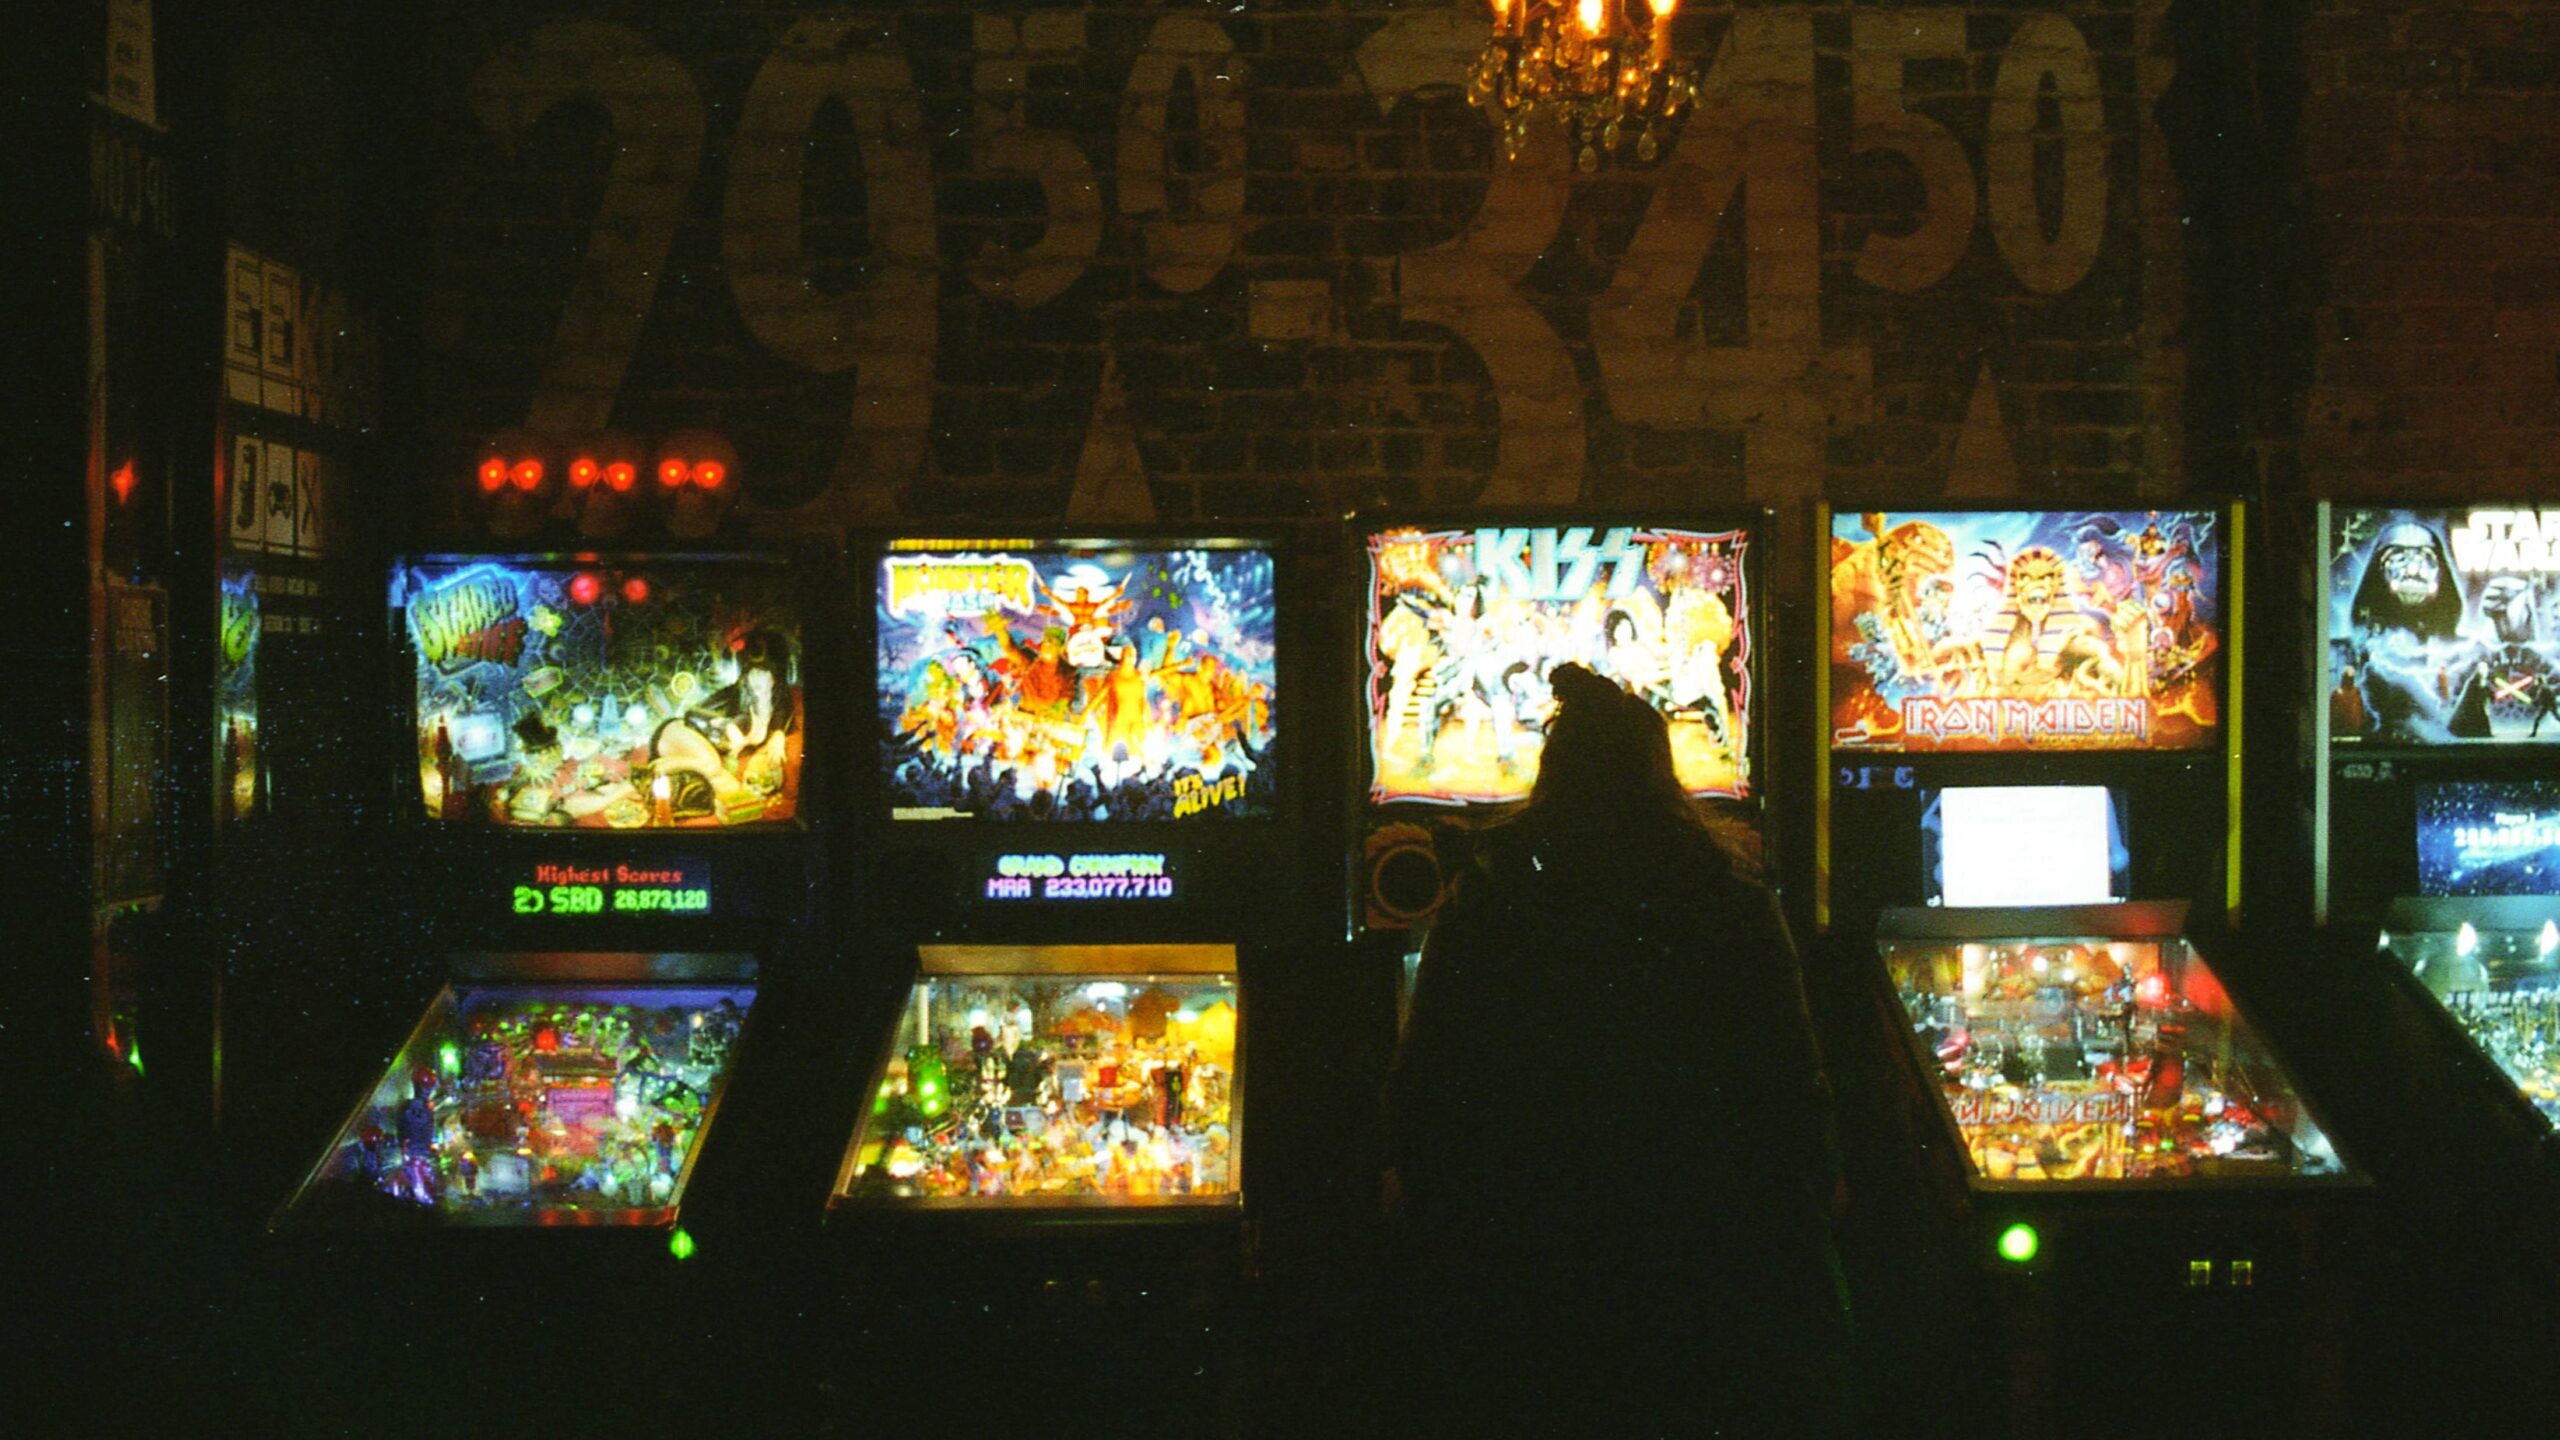 A row of lit up pinball games with a girl playing one in a dark room.